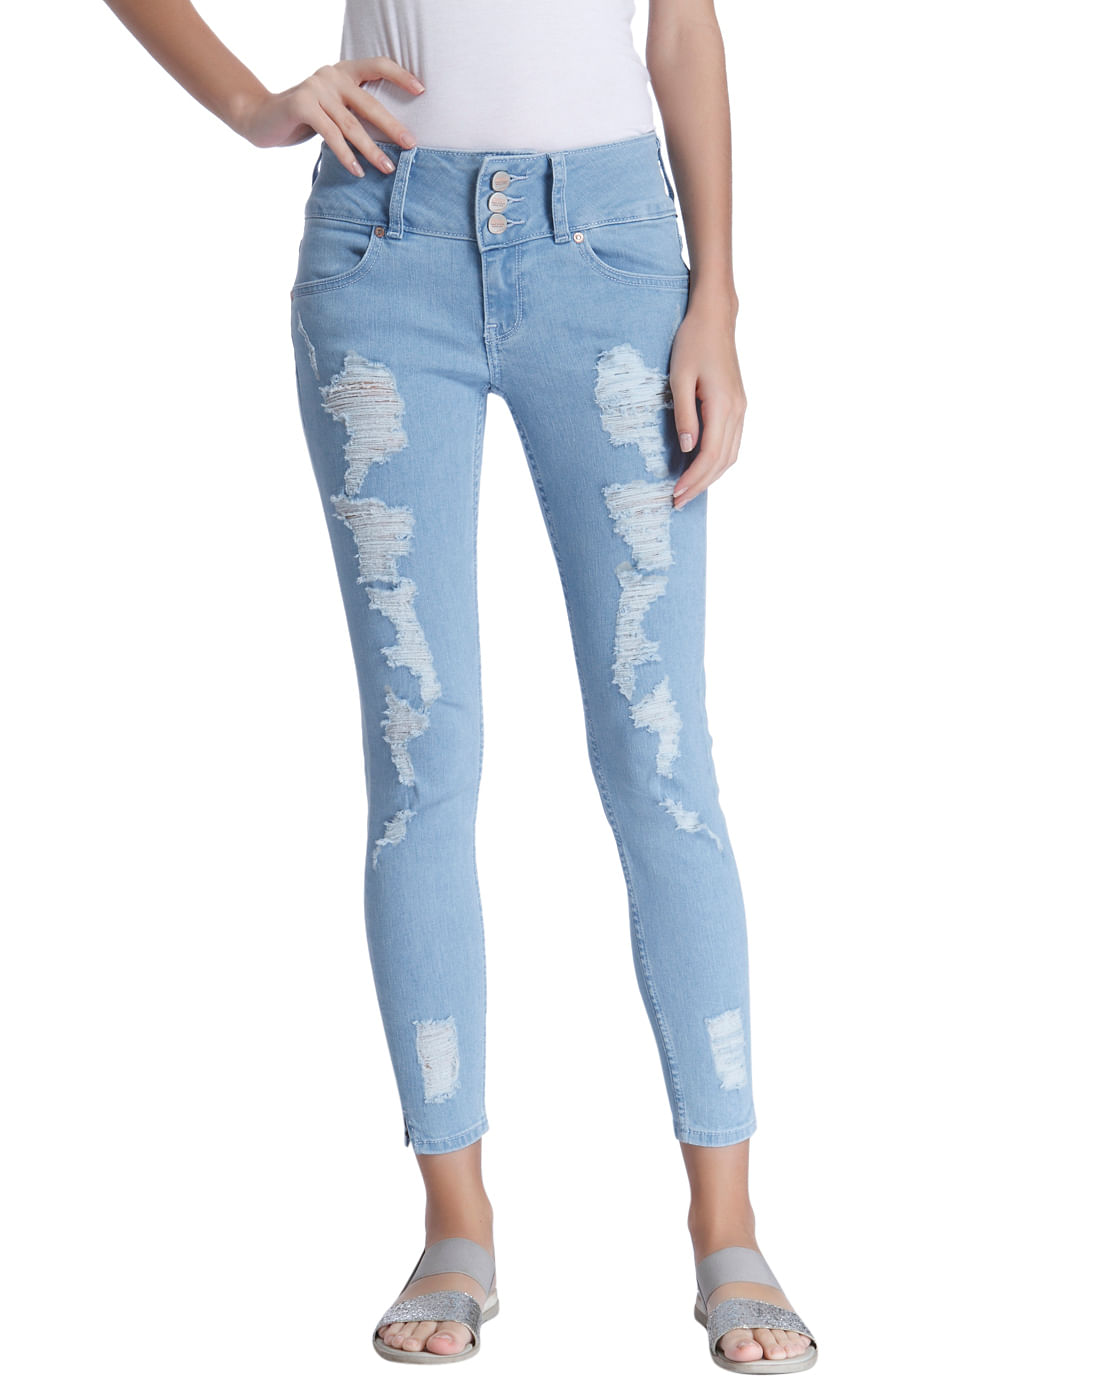 low waist jeans for ladies online